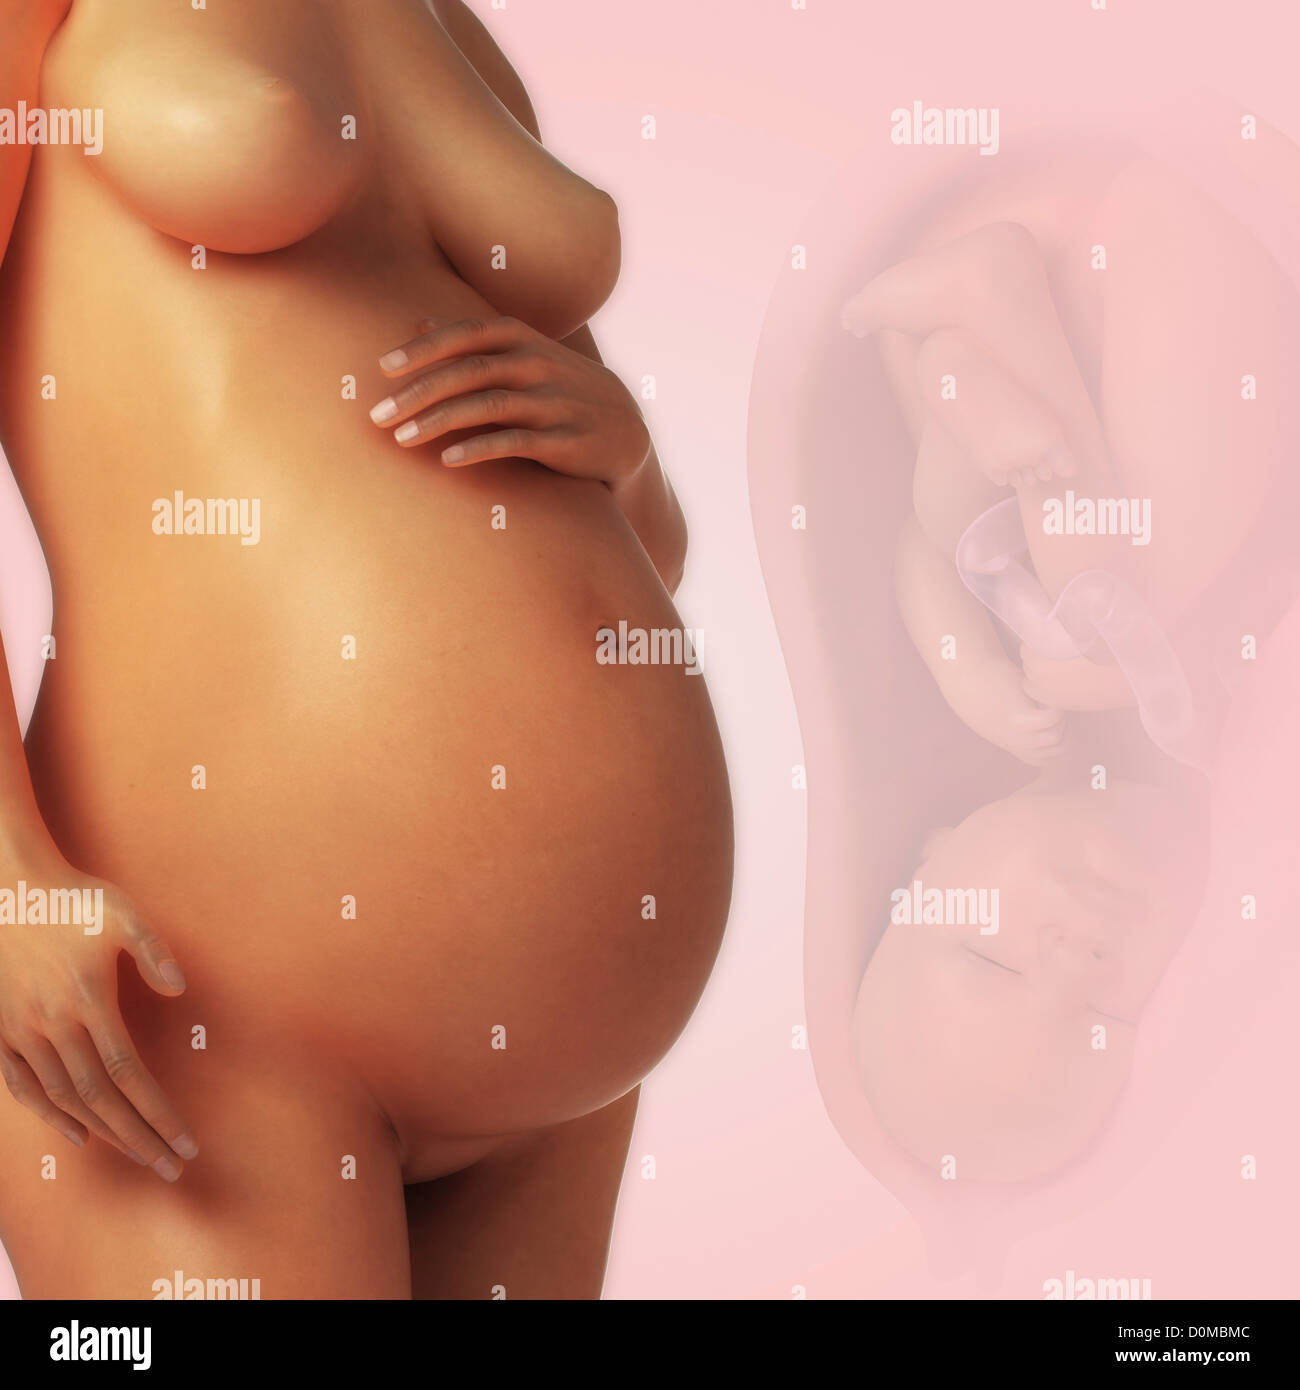 A human model showing pregnancy. Stock Photo